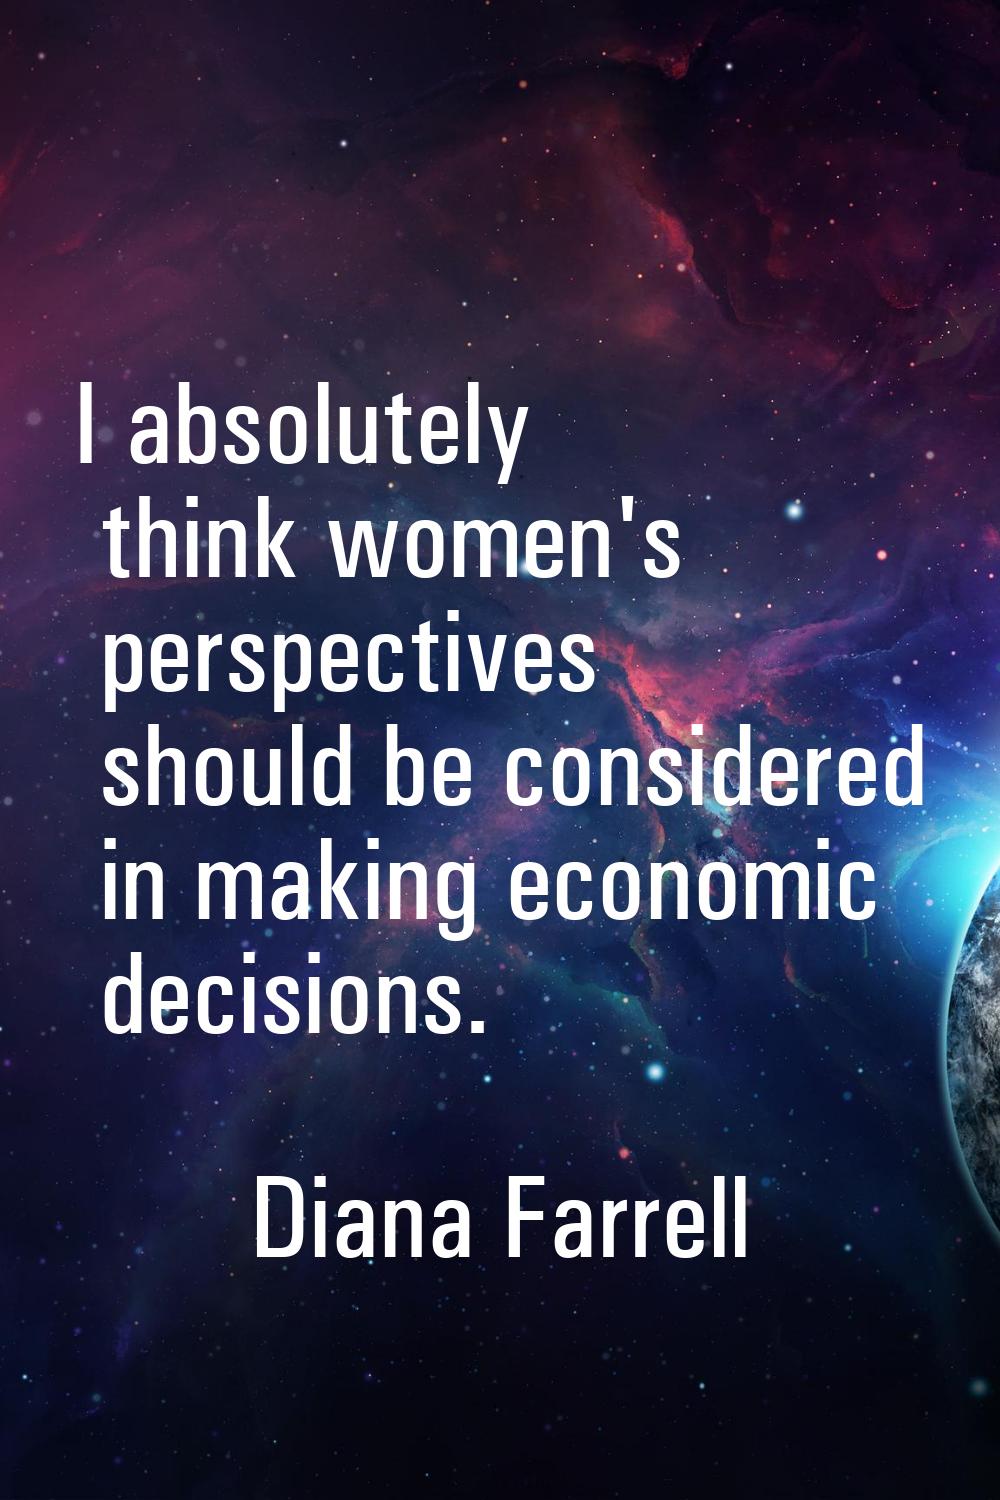 I absolutely think women's perspectives should be considered in making economic decisions.